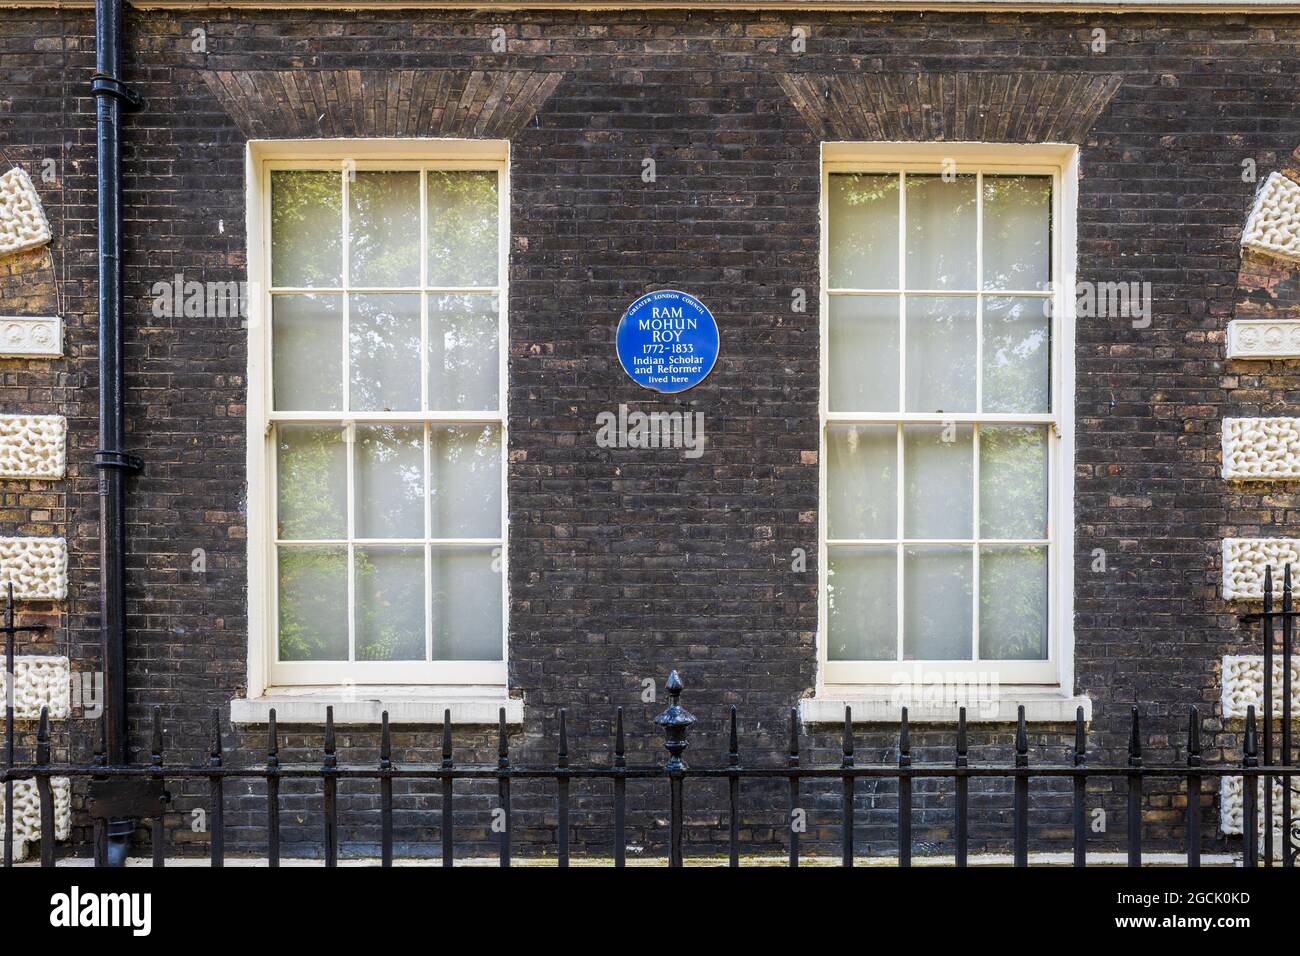 Ram Mohun Roy Blue Plaque 49 Bedford Square, Bloomsbury, London. RAM MOHUN ROY 1772-1833 Indian Scholar and Reformer lived here. Stock Photo